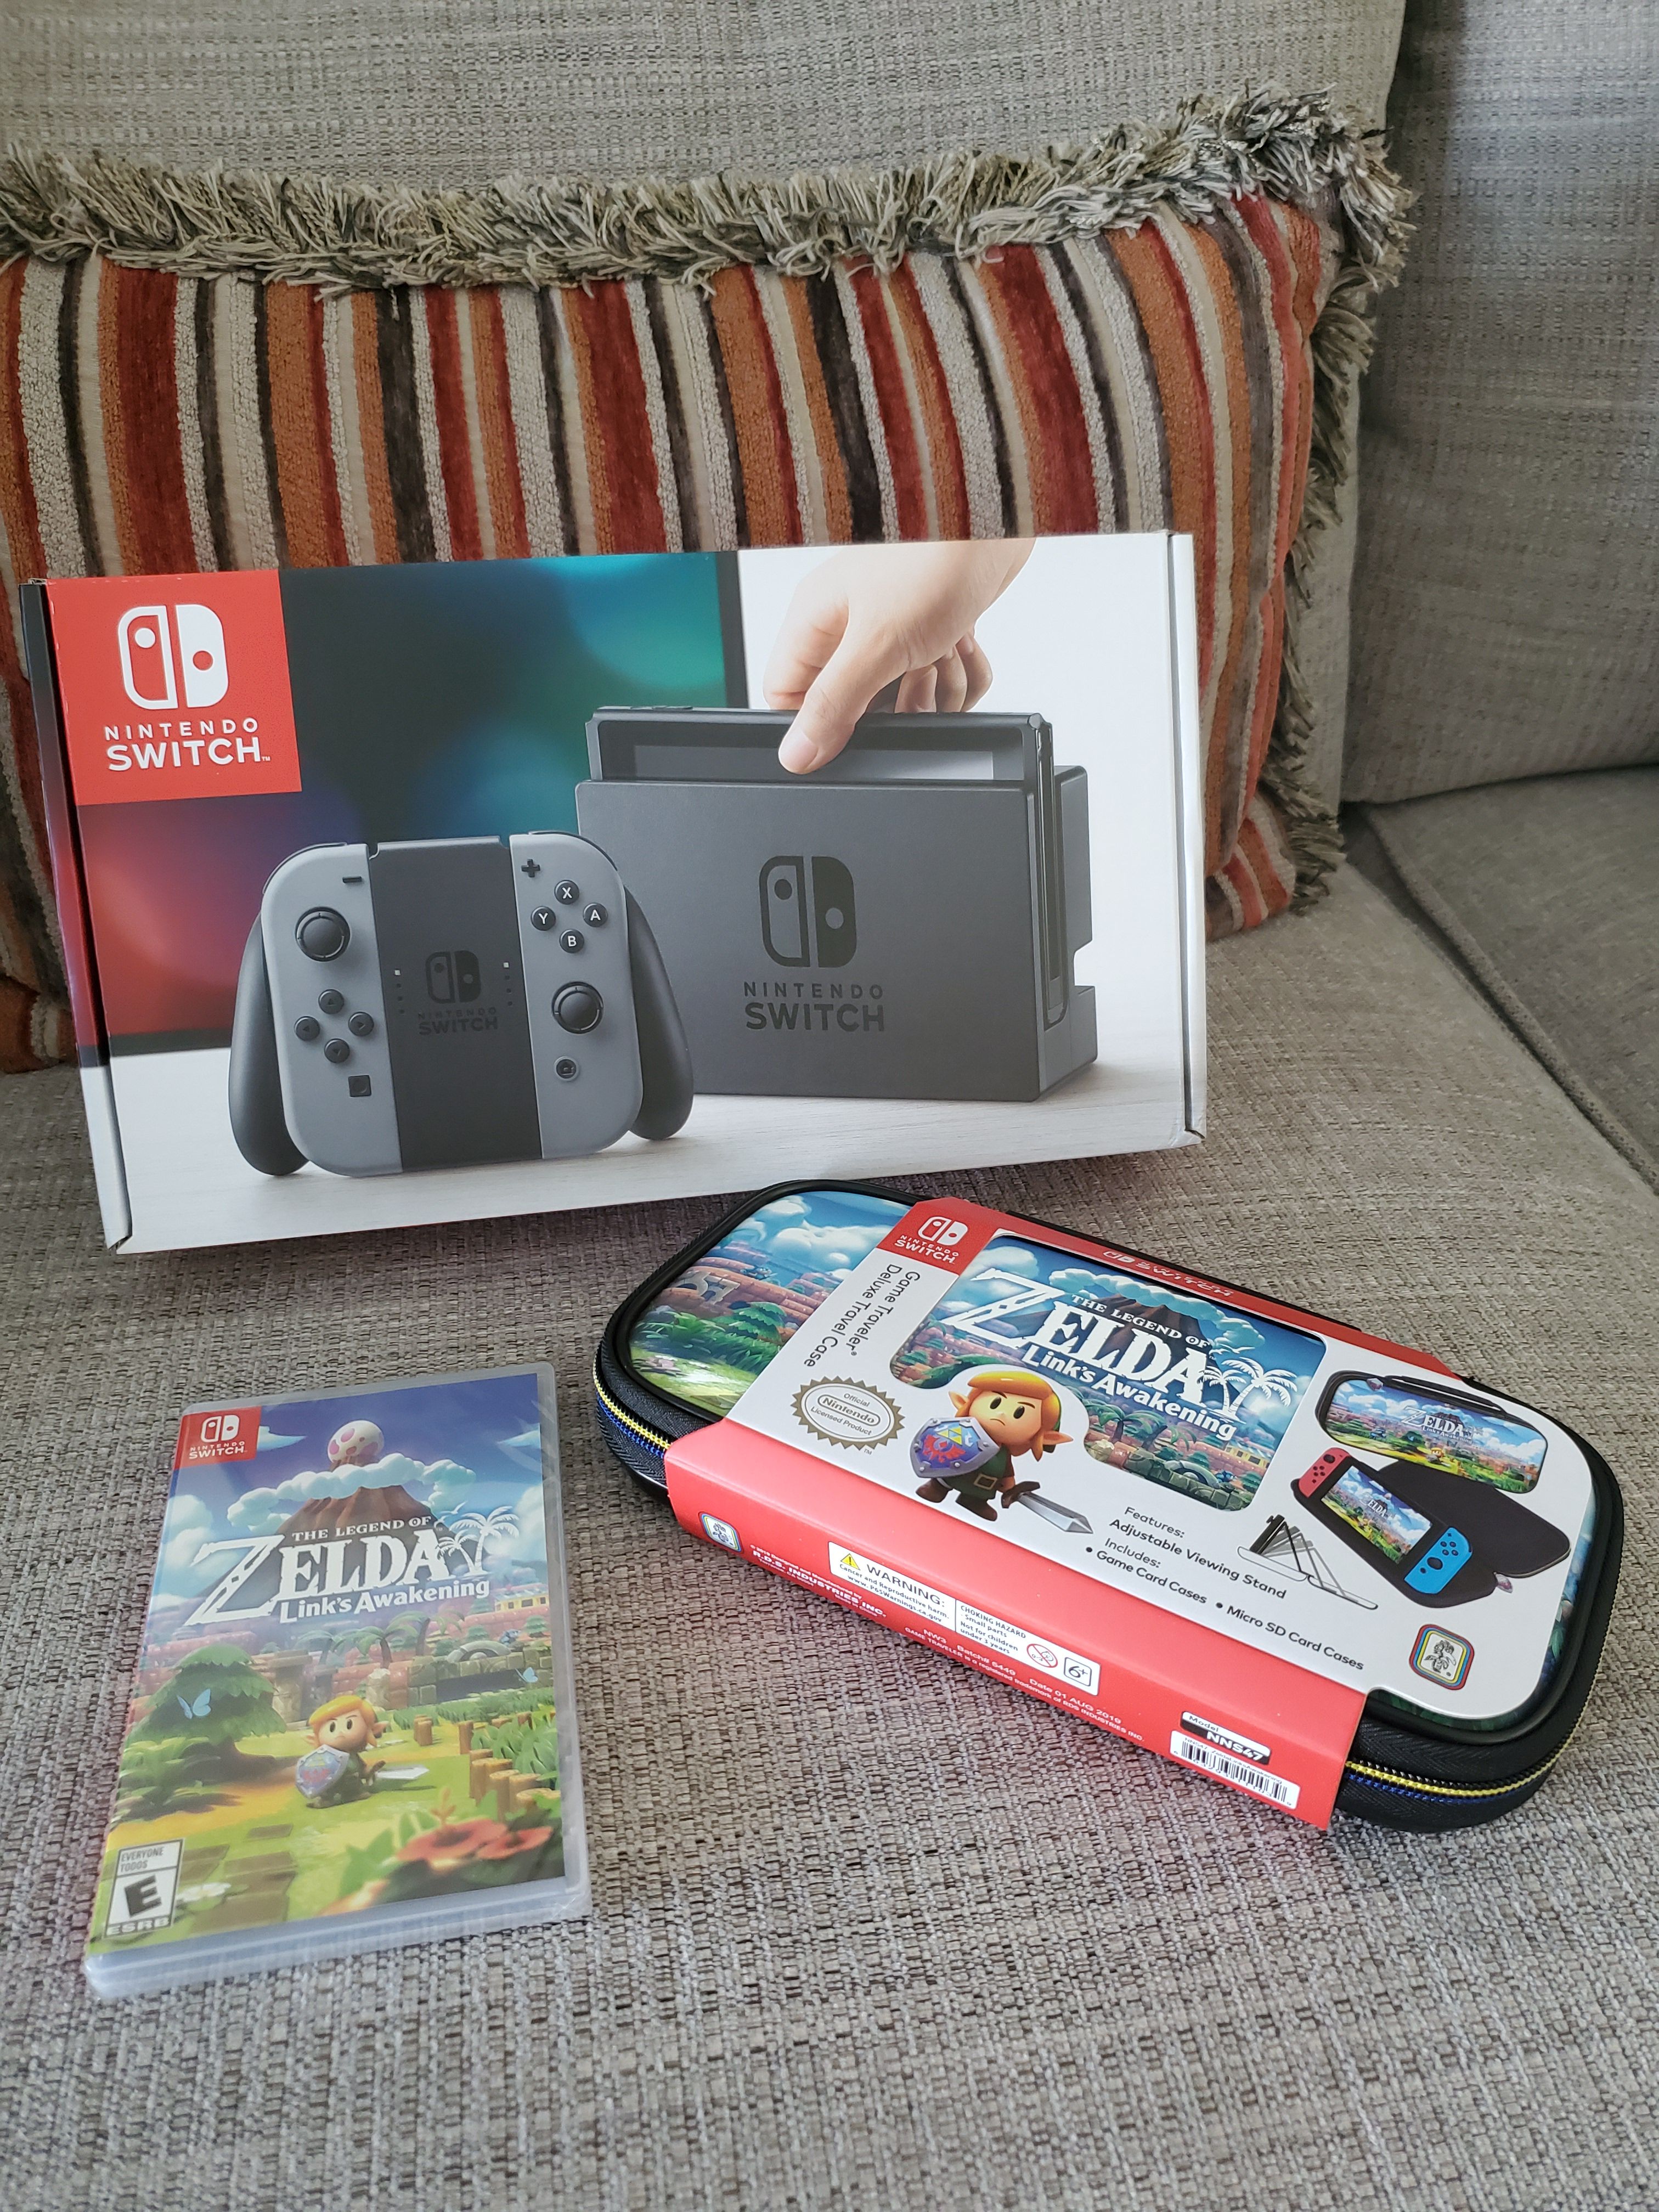 NINTENDO SWITCH WITH ZELDA LINK'S AWAKENING AND TRAVEL CASE (NEW - NO TRADES)